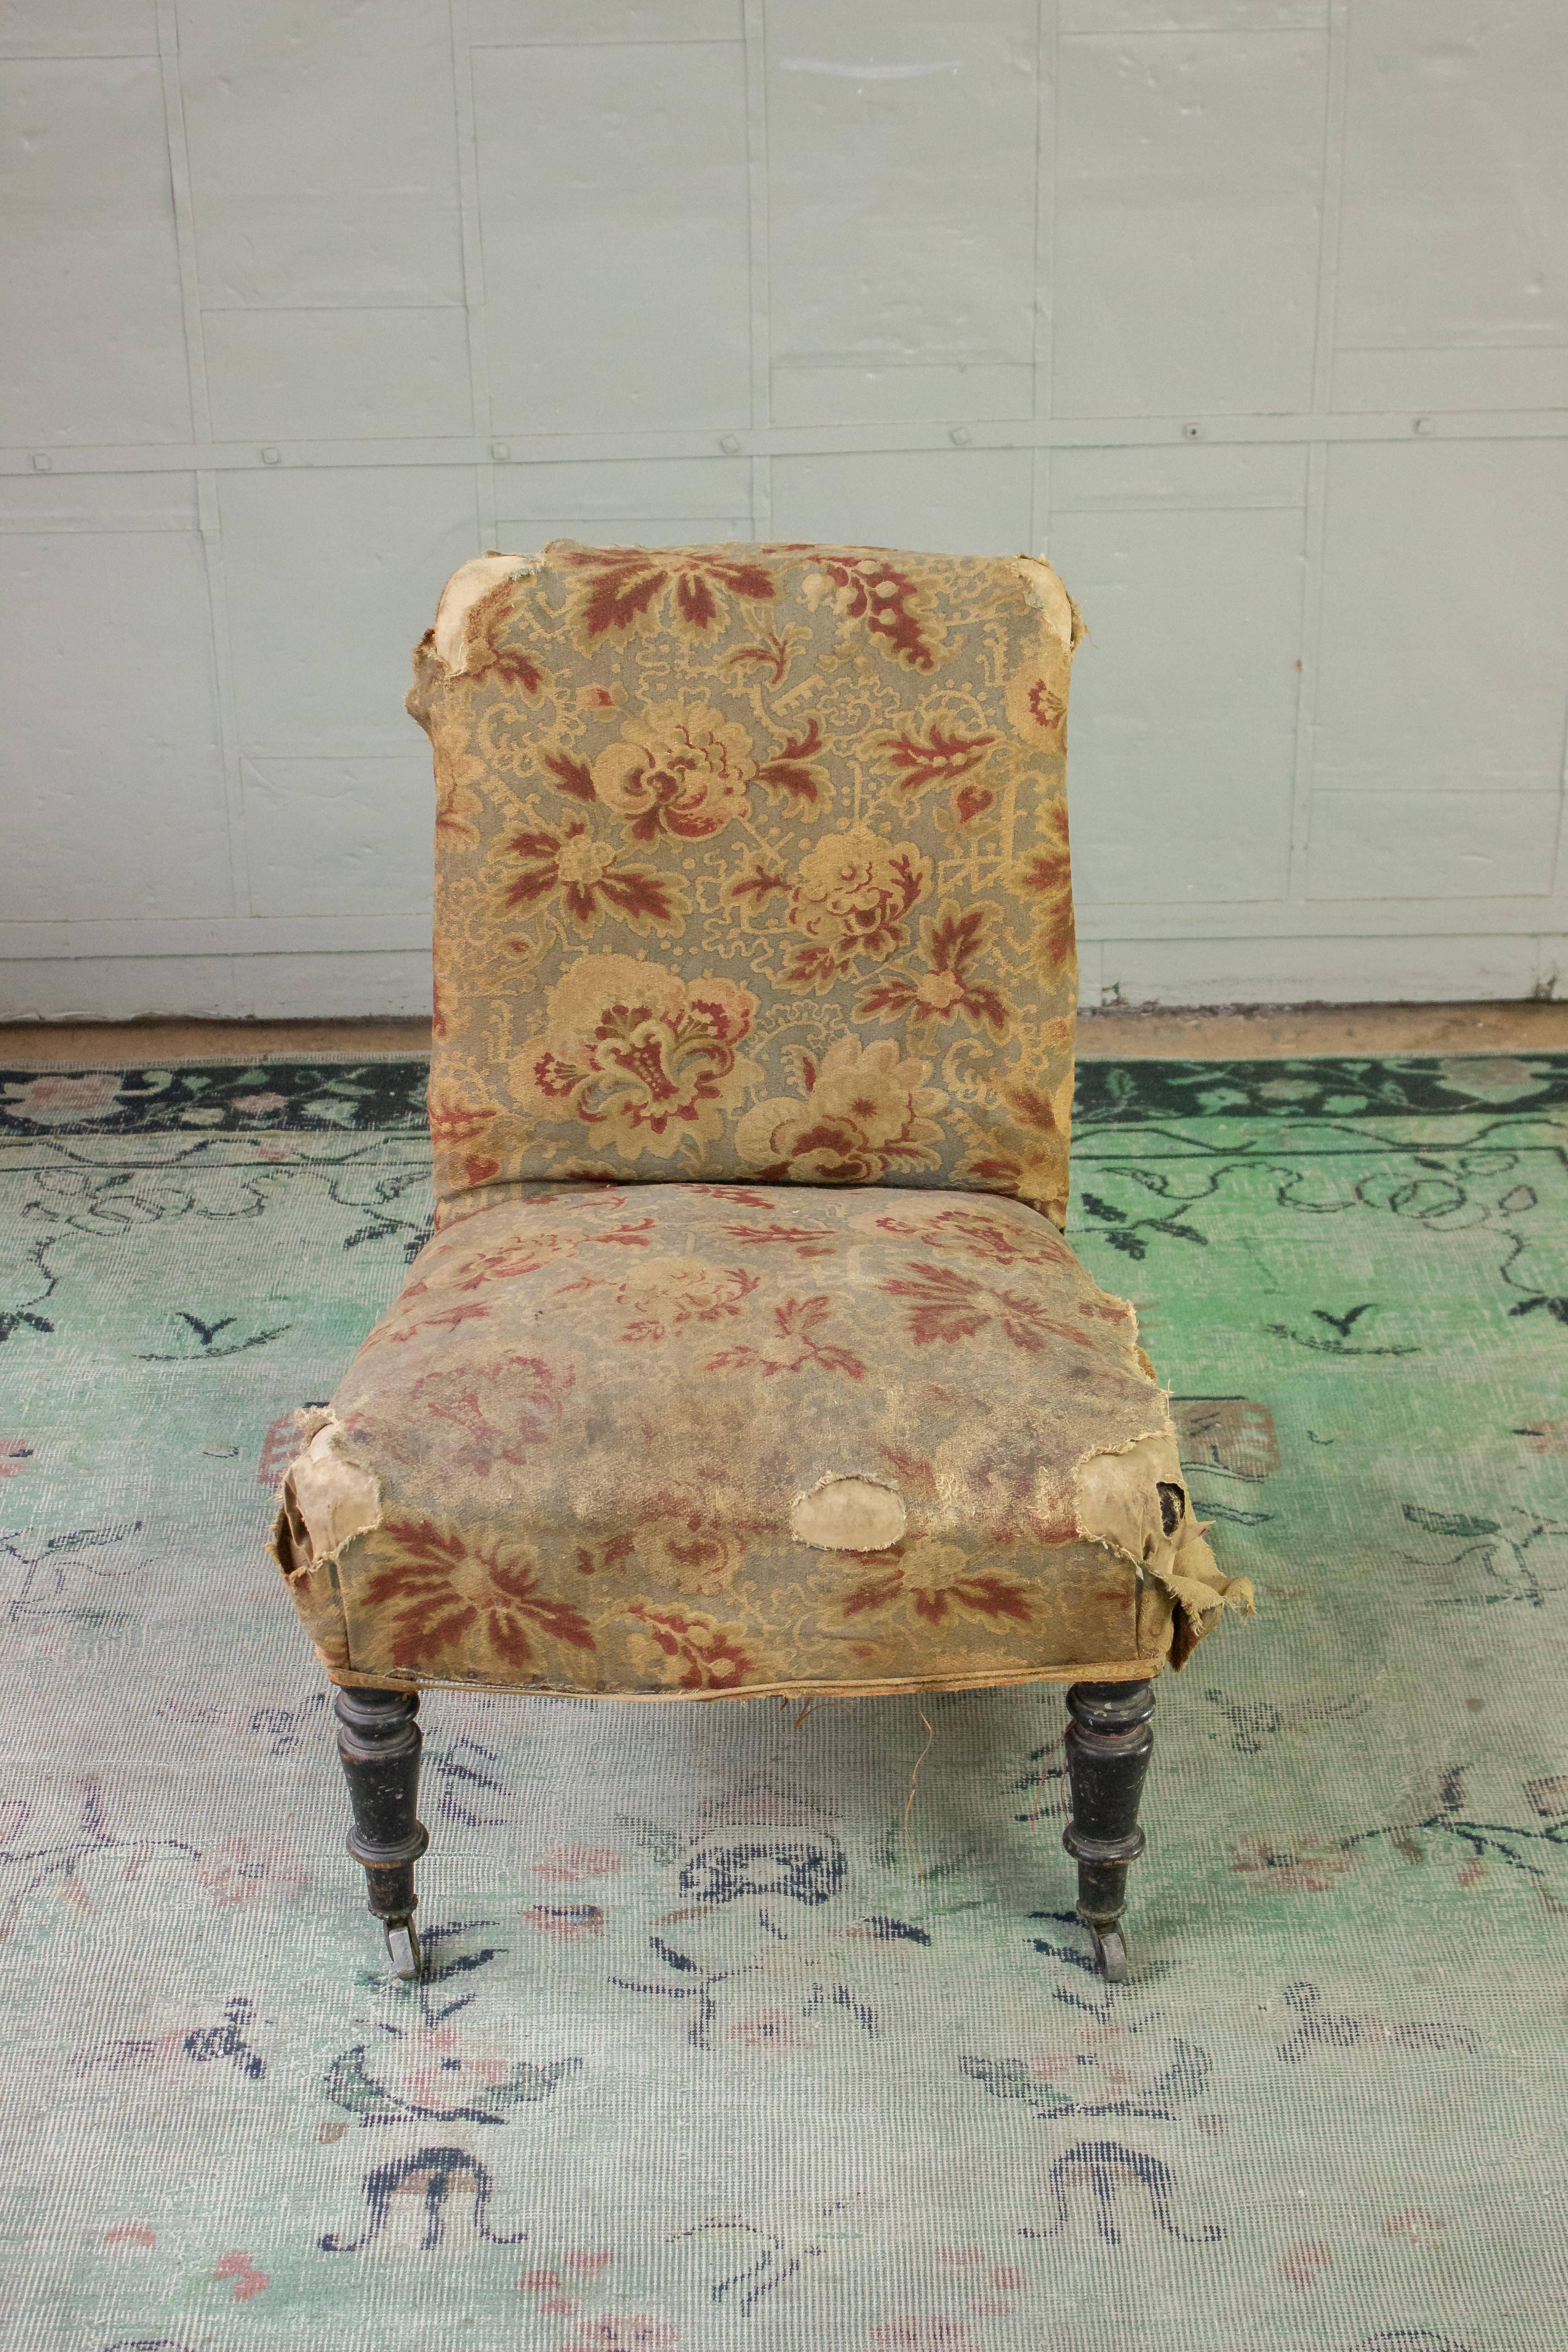 Petite French 19th century slipper chair with distressed fabric.

Upholstery and refinishing options are available.